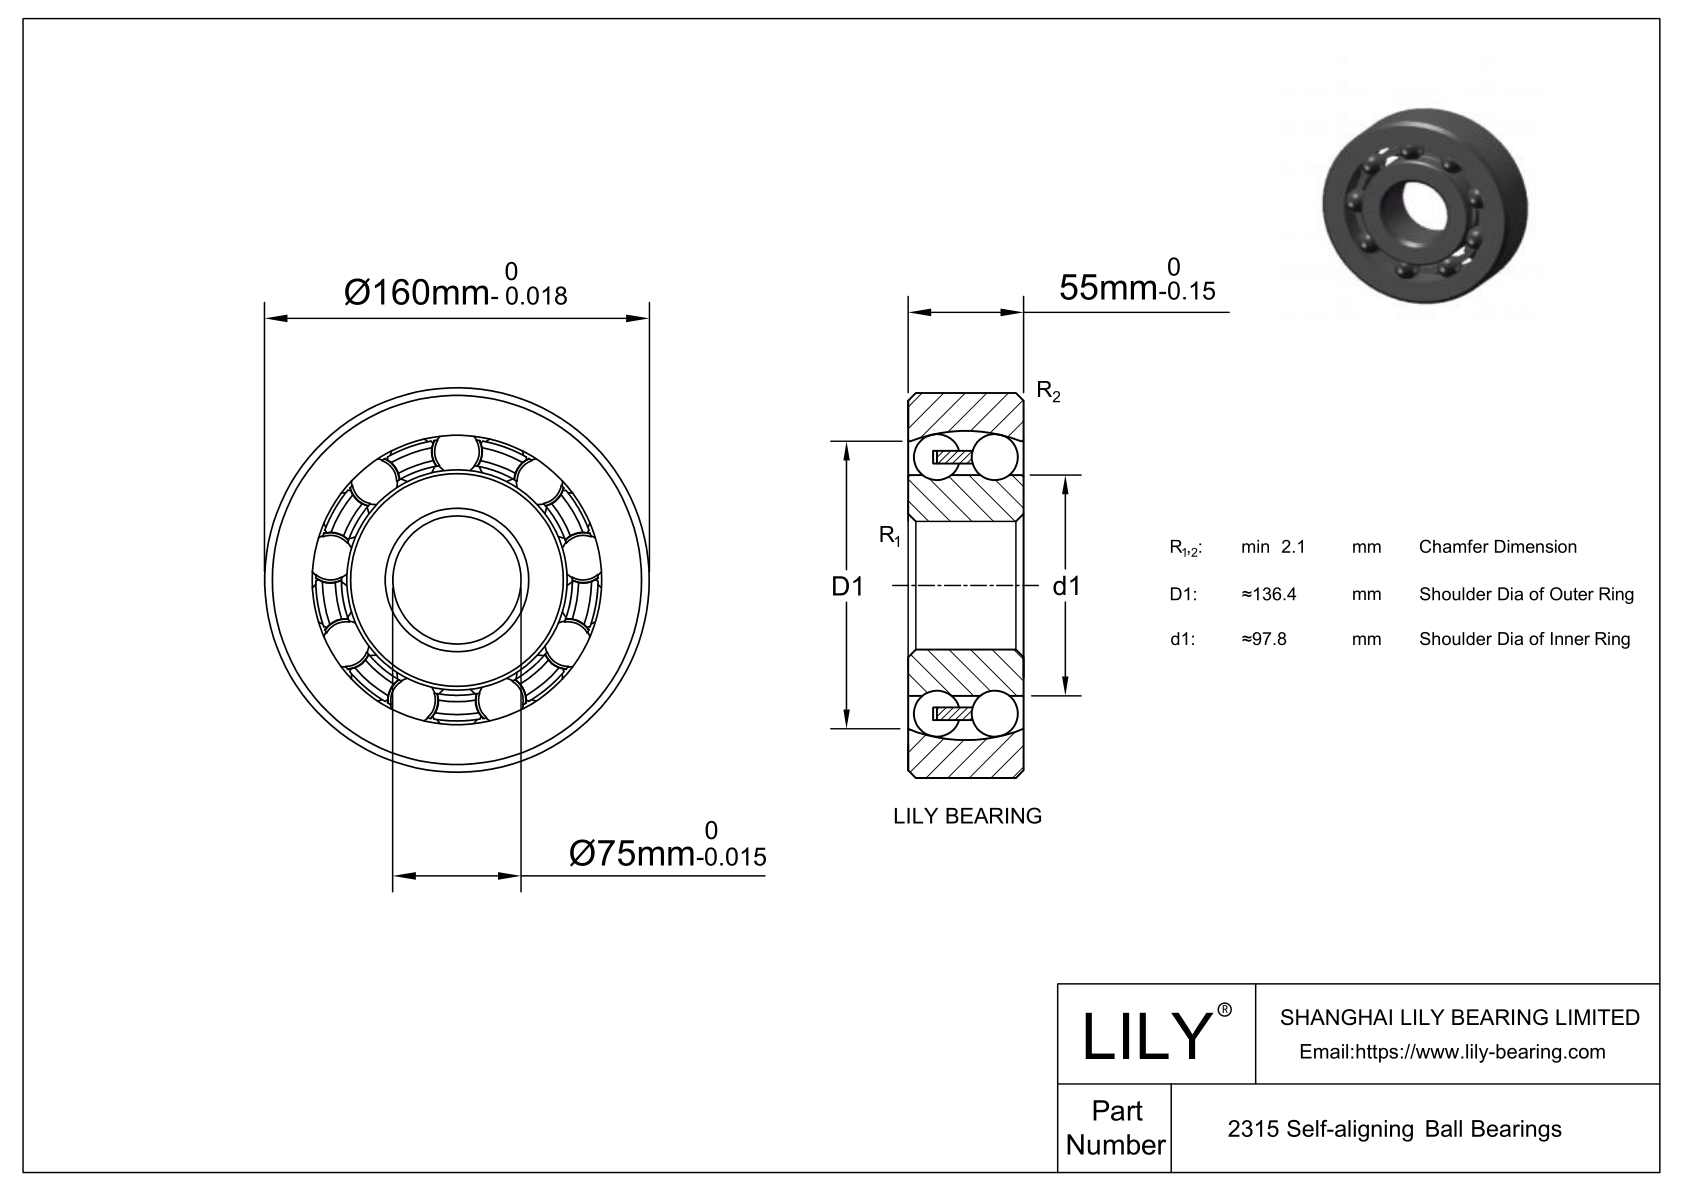 S2315 Stainless Steel Self Aligning Ball Bearings cad drawing